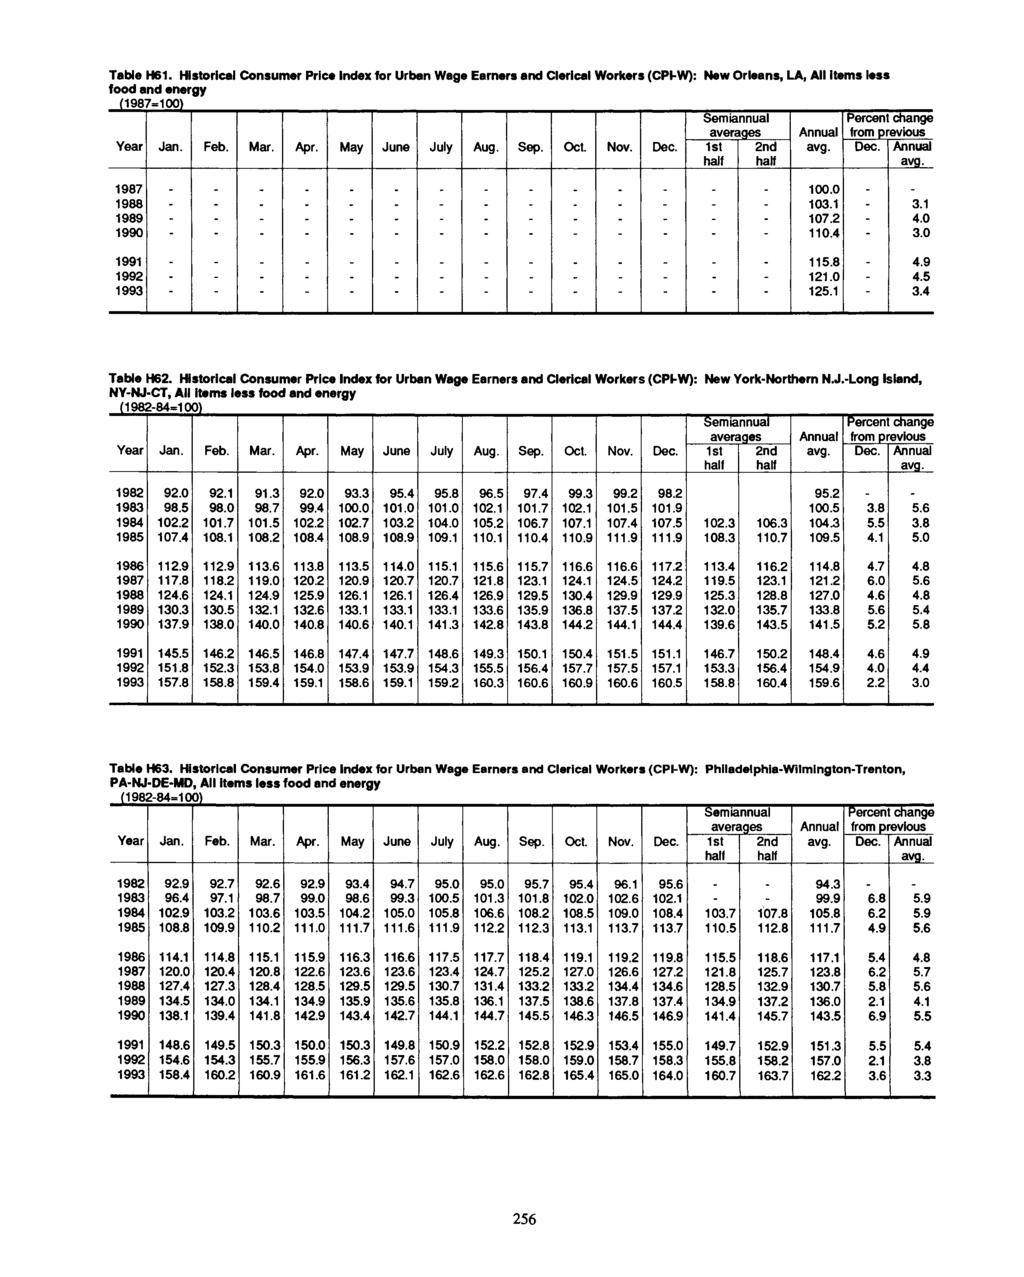 Table H61. Historical Consumer Price for Urban Wage Earners and Clerical Workers (CPI-W): New Orleans, LA, All items less food and energy (1987=100) Year Feb. Mar. Apr. May June July Aug. Sep. Oct.